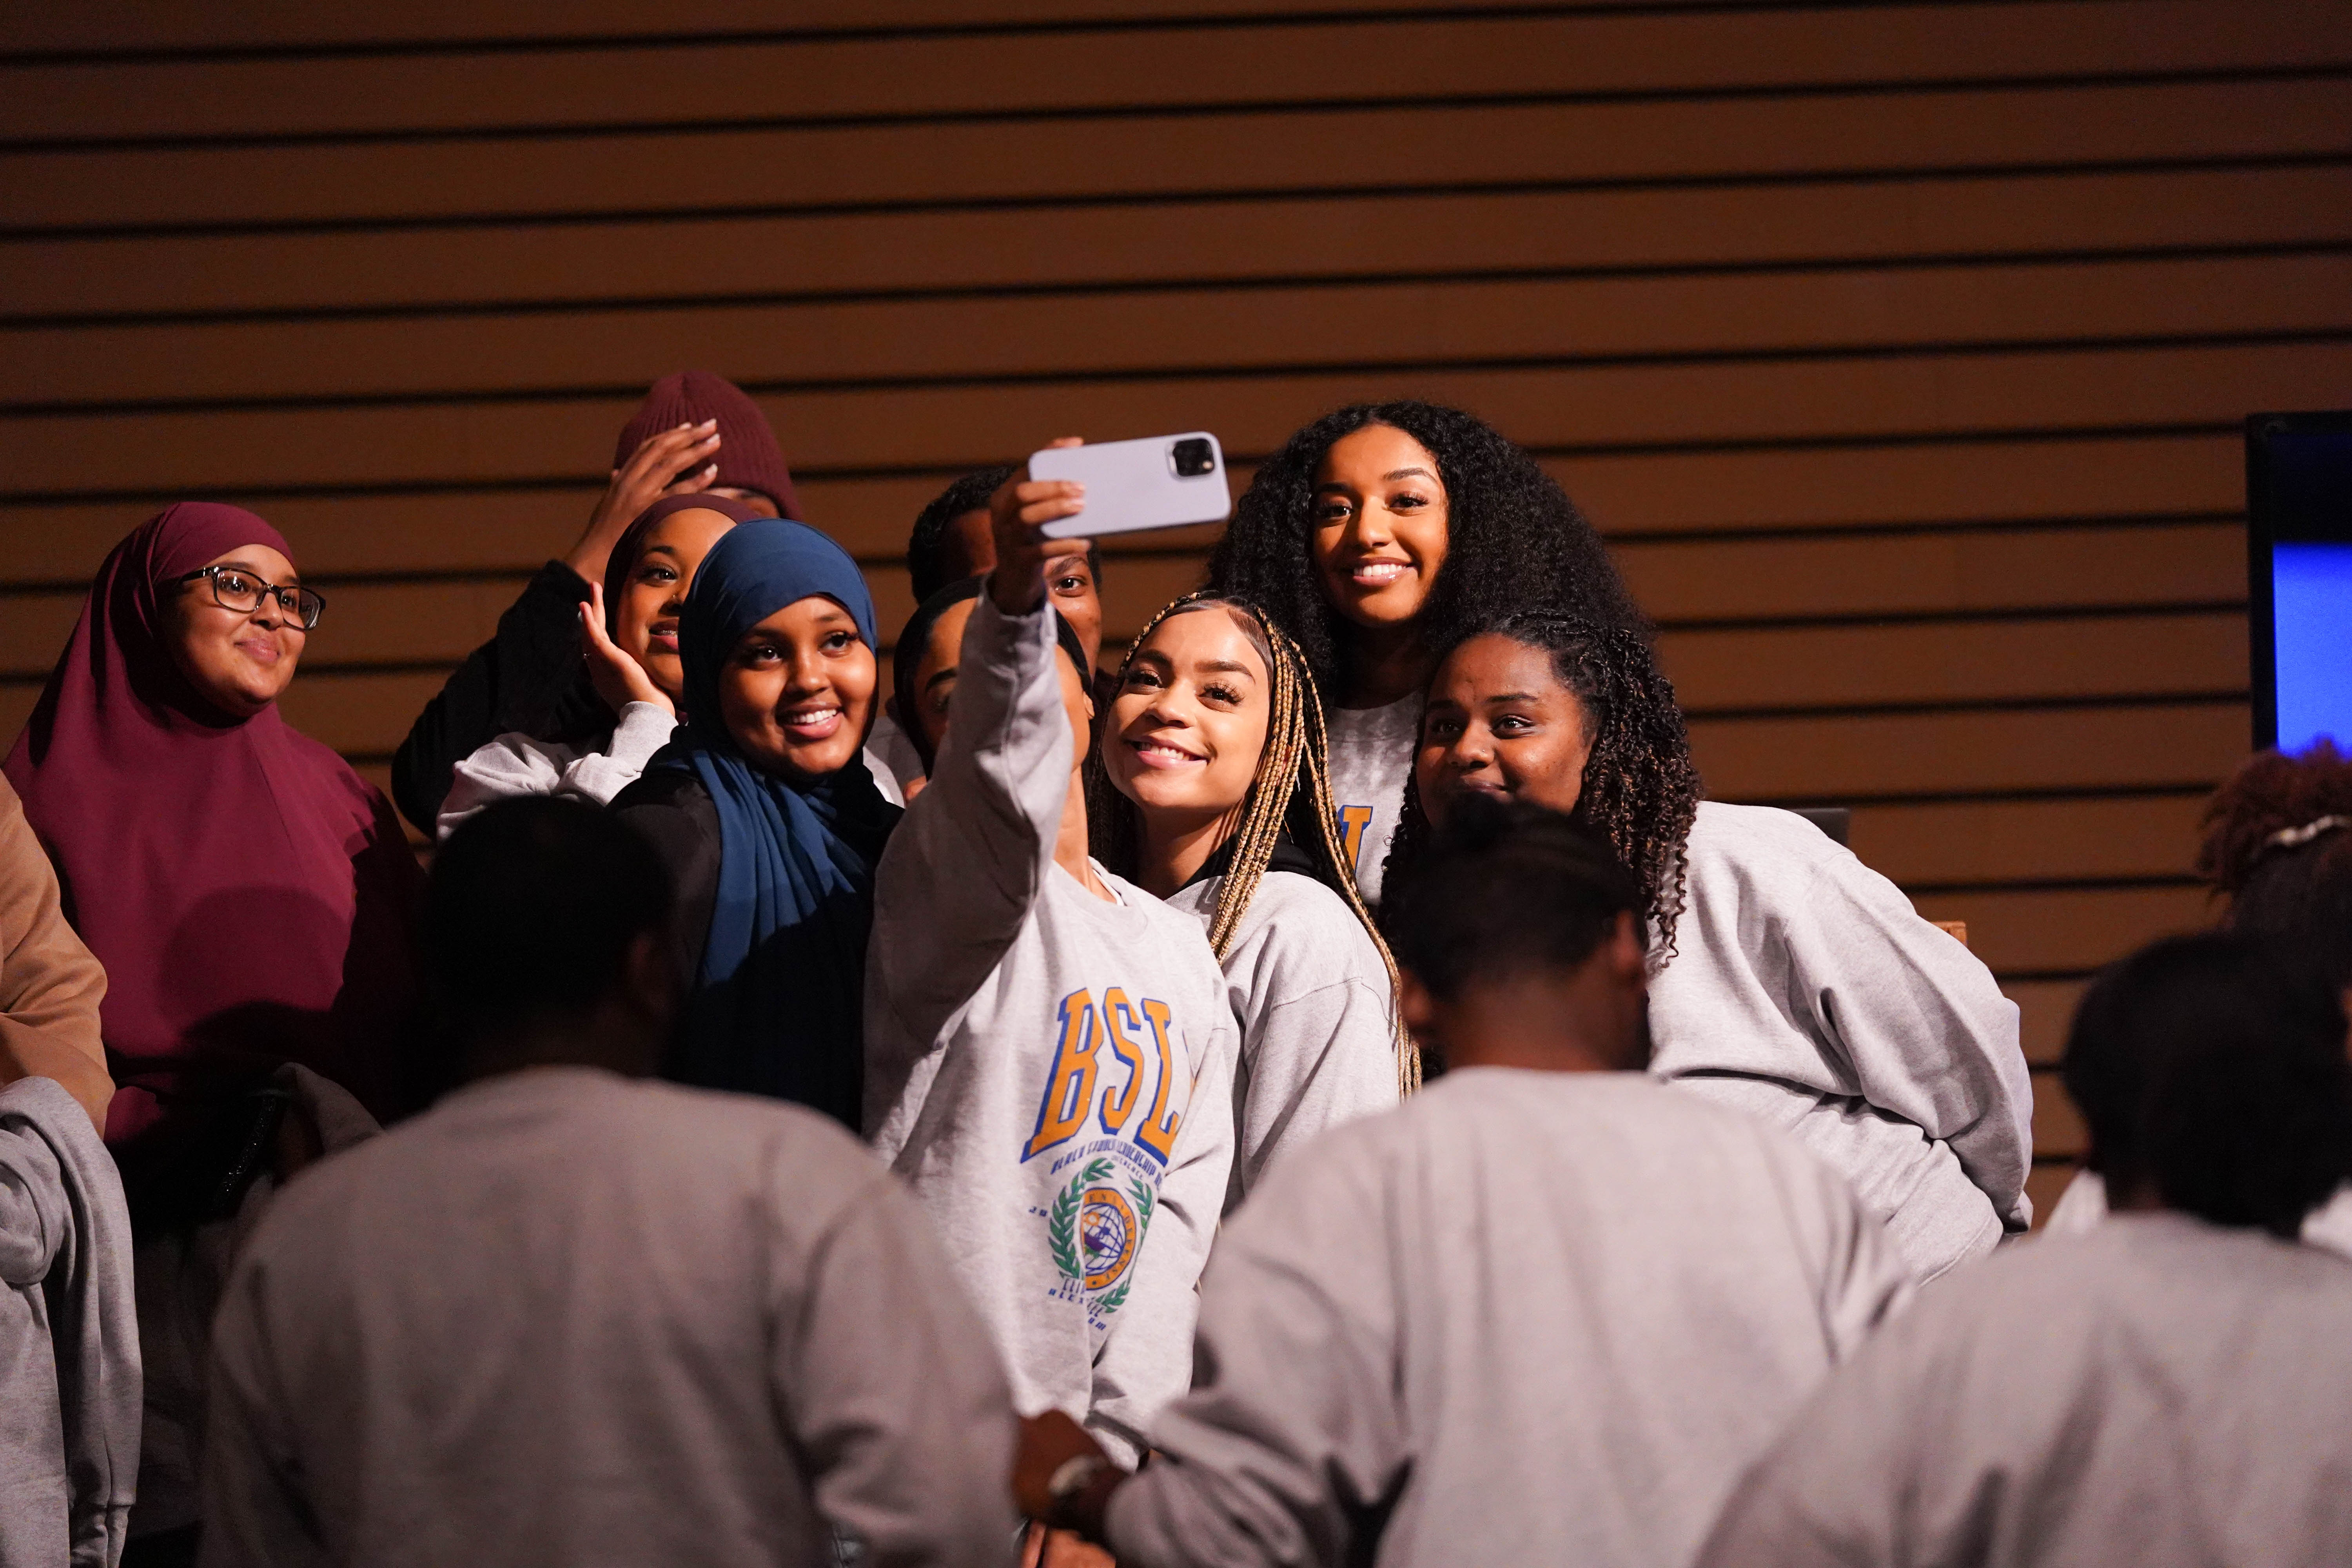 BSLN Students gathered together for a selfie